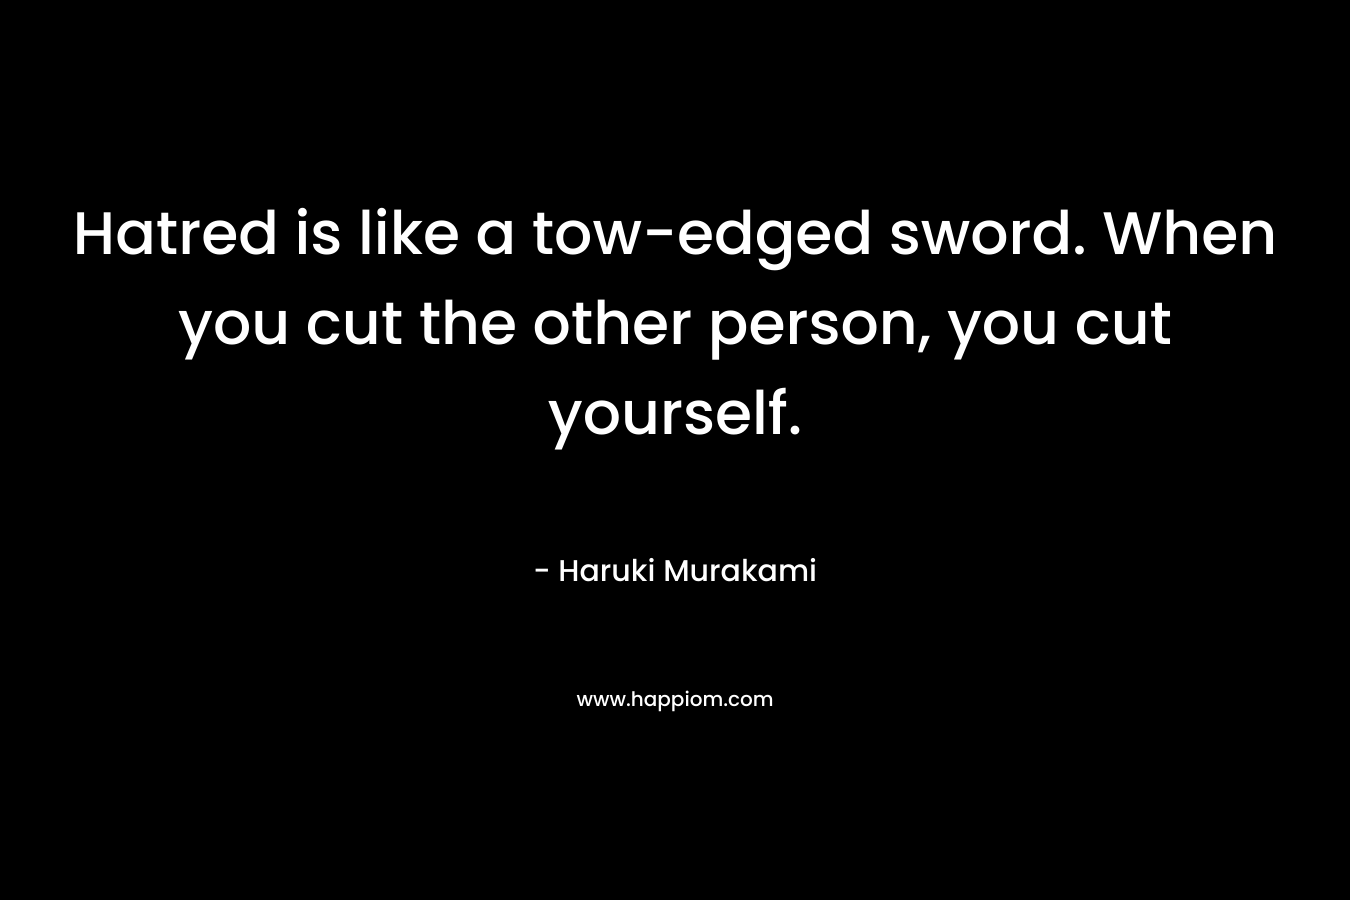 Hatred is like a tow-edged sword. When you cut the other person, you cut yourself.